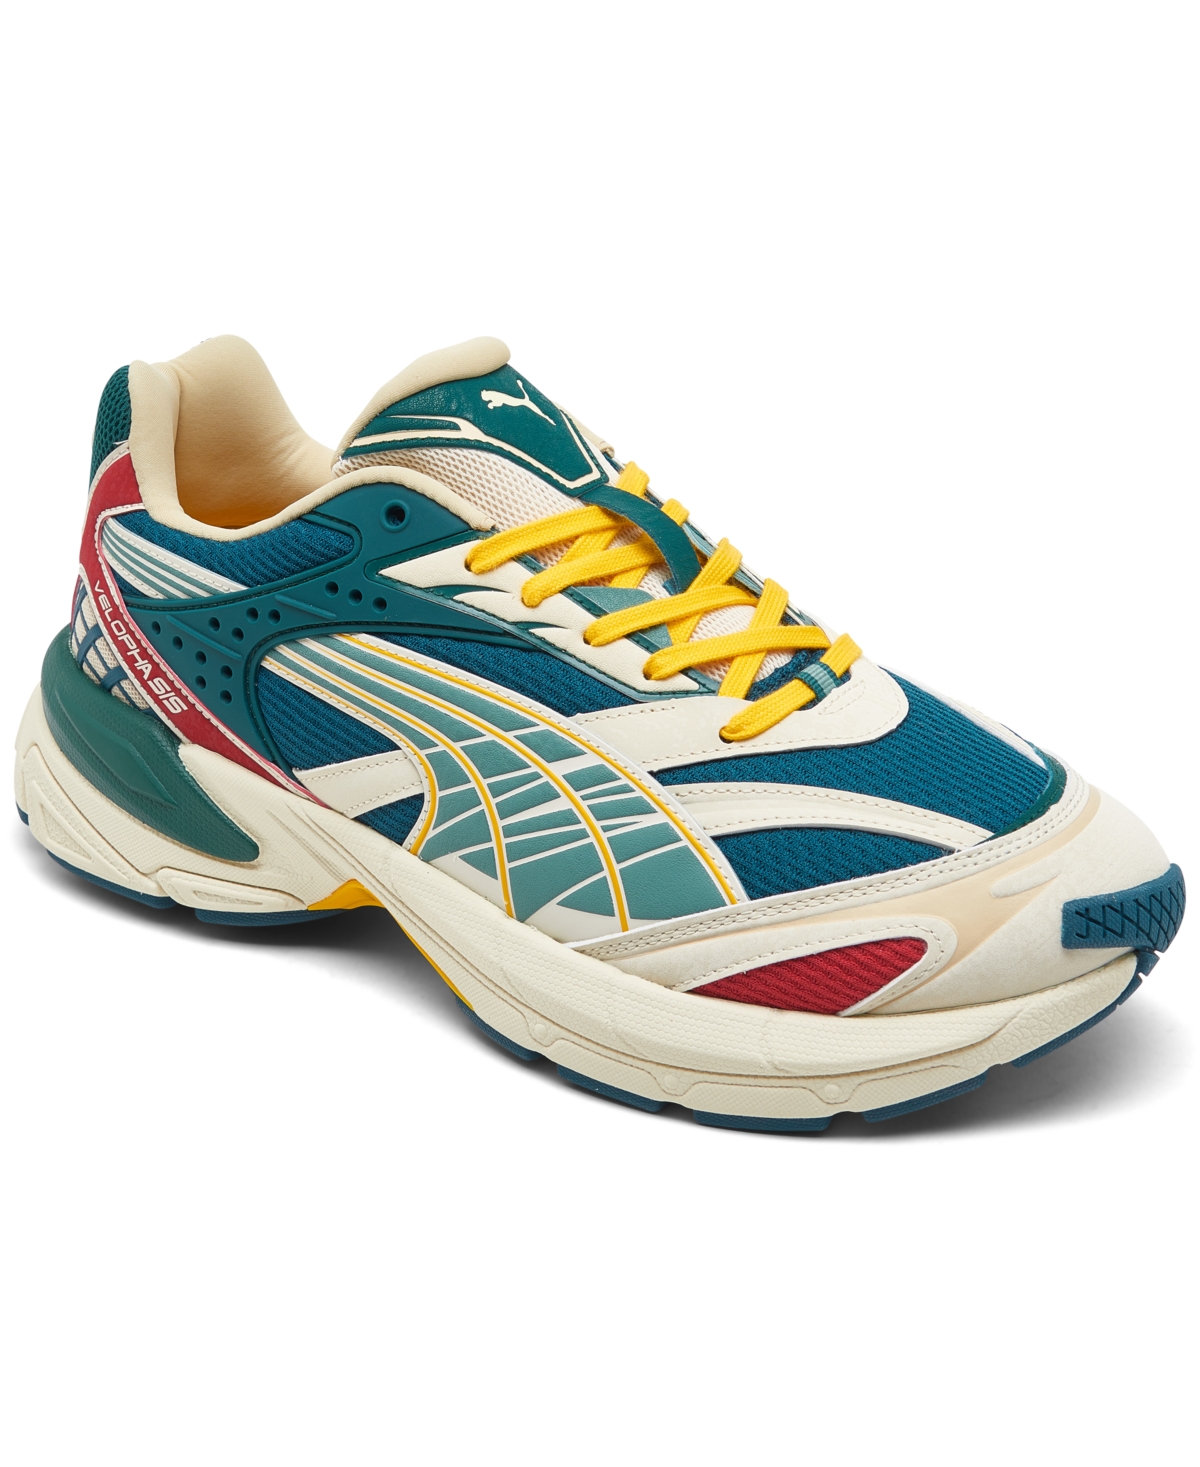 Puma Men's Velophasis Underdogs Casual Sneakers From Finish Line In Ocean Tropic/adriatic/yellow Sizzle